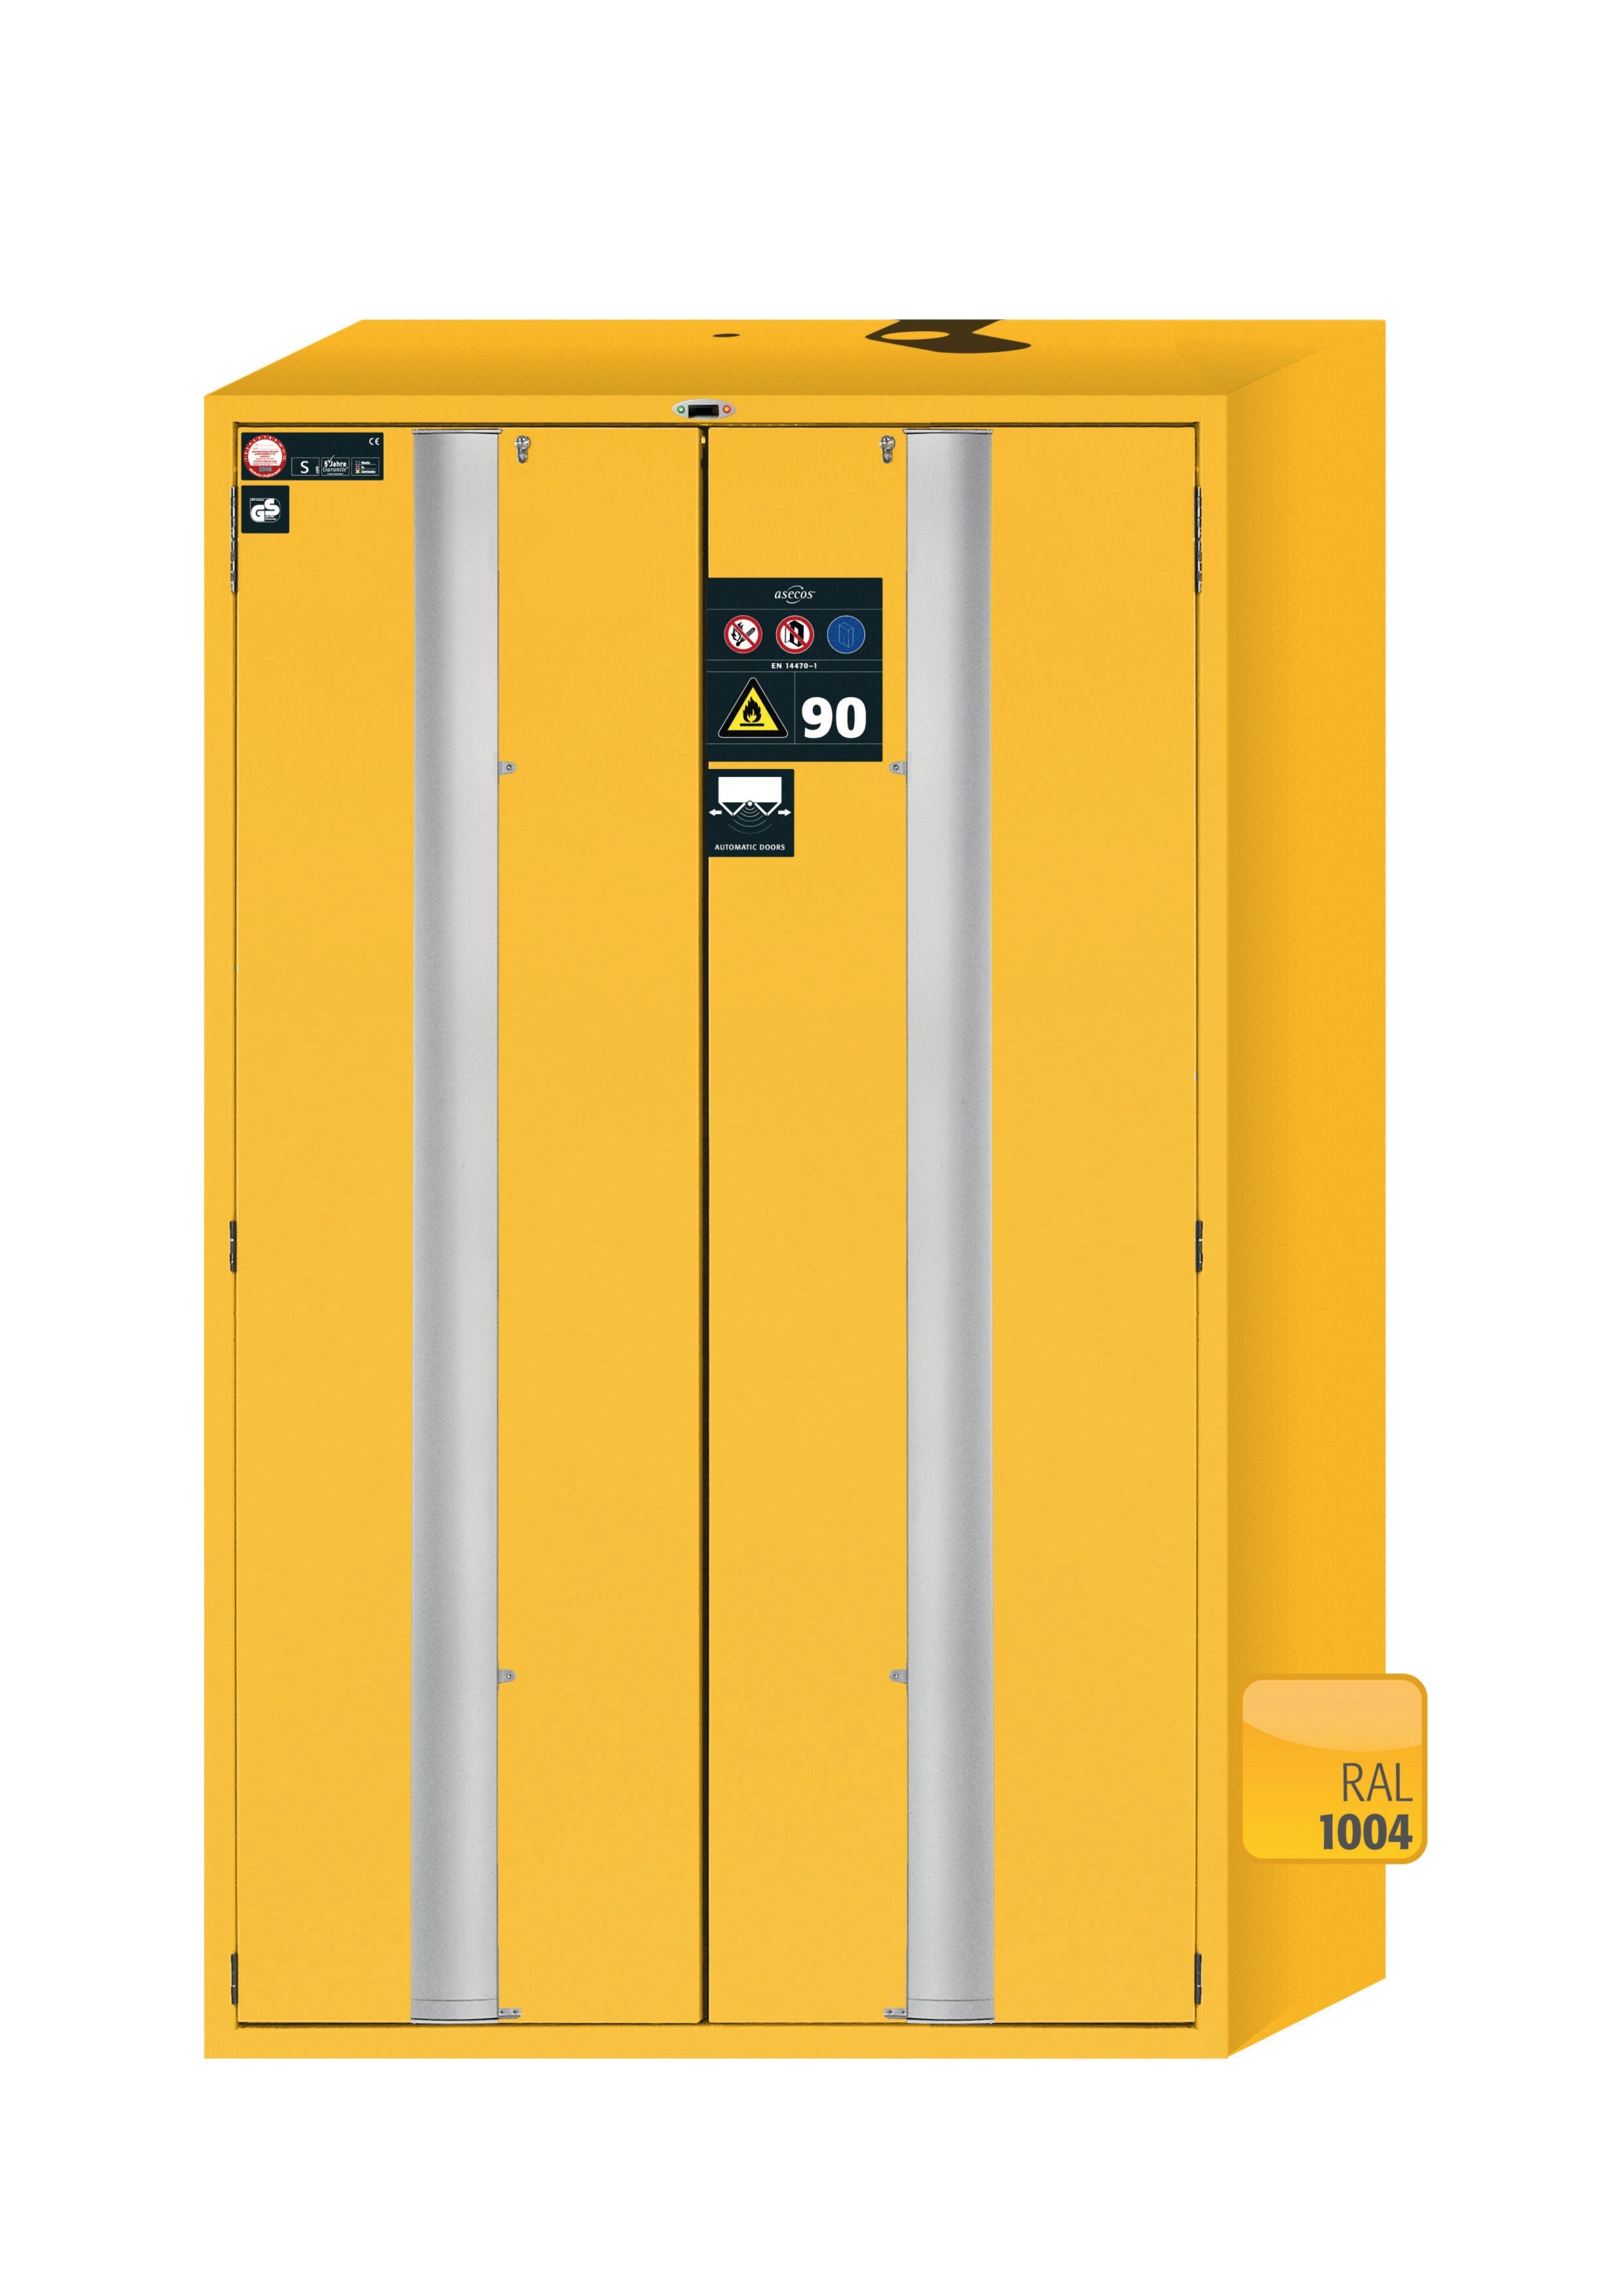 Type 90 safety cabinet S-PHOENIX touchless-90 model S90.196.120.FDAO in safety yellow RAL 1004 with 5x standard pull-out tray (stainless steel 1.4301)